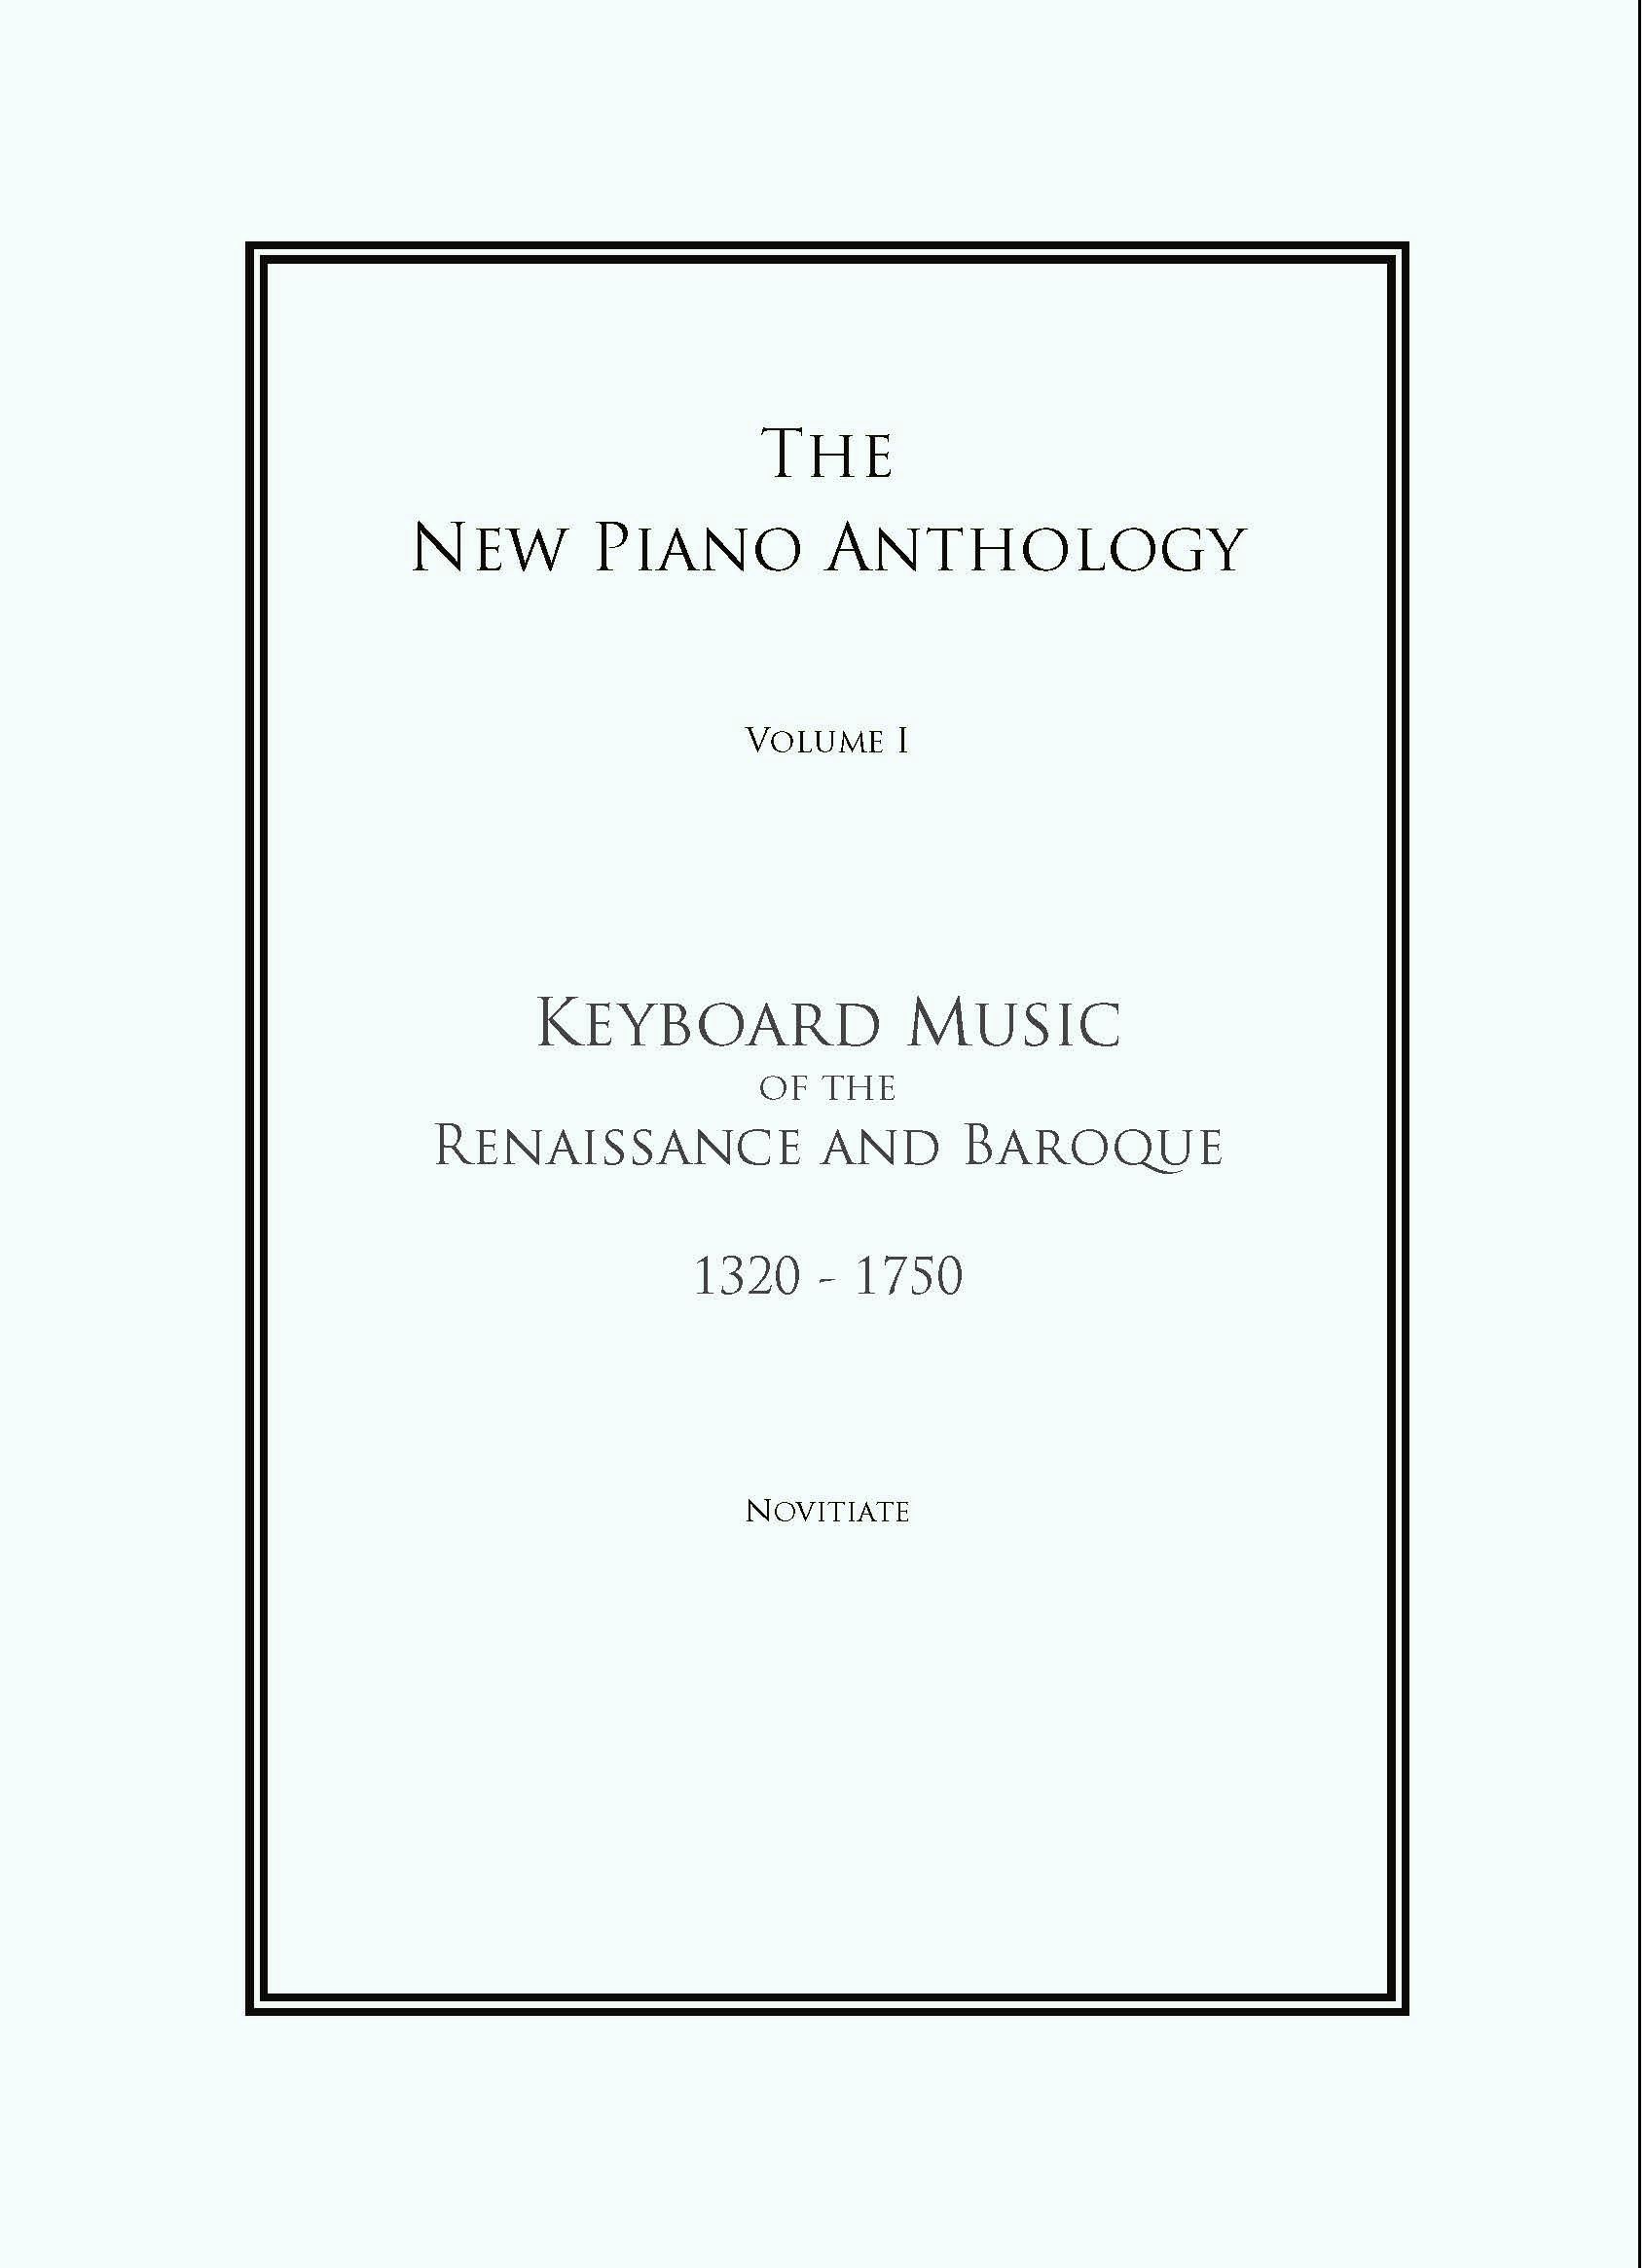 Keyboard Music of the Renaissance and Baroque (Novitiate)